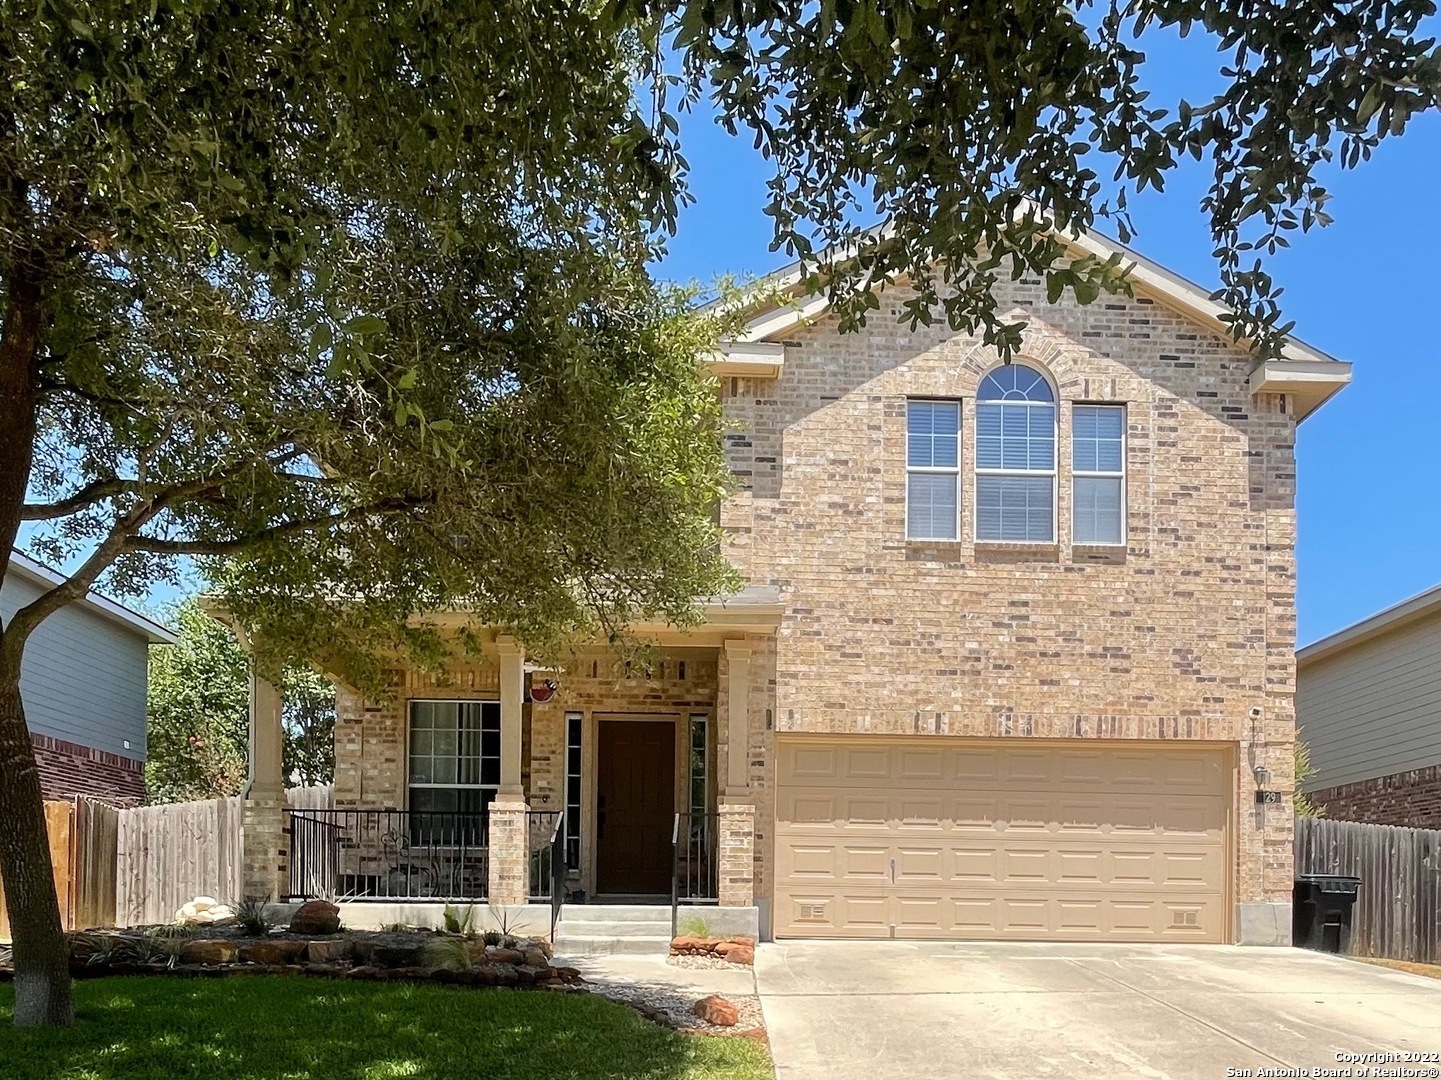 This lovely home is located close to all major shopping in Cibolo, TX, and has so much to offer you will never want to leave! Check out the charming curb appeal then walk into a bright and welcoming space with lots of tall windows, a sought-after open floorplan, and beautiful, easy-to-maintain, faux wood flooring. Mingle with guests at the kitchen bar as you cook or enjoy a sit-down dinner in your eat-in kitchen or the formal dining room. In the summer you can BBQ on the spacious rear patio and then cool off in the resort-style swimming pool and in the winter you can get cozy on your couch in front of your wood-burning fireplace or kick your feet up outside and relax at the backyard fire pit. On the 2nd floor enjoy a sprawling family room/office and four bedrooms with oversized closets. The main suite is spacious and has a private bathroom with double sinks, a garden tub, a separate shower, and two walk-in closets. The two-car garage offers additional storage and the driveway has enough space to accommodate parking four vehicles. HOA fees are reasonable and allow access to the community pool. Schedule a tour today!